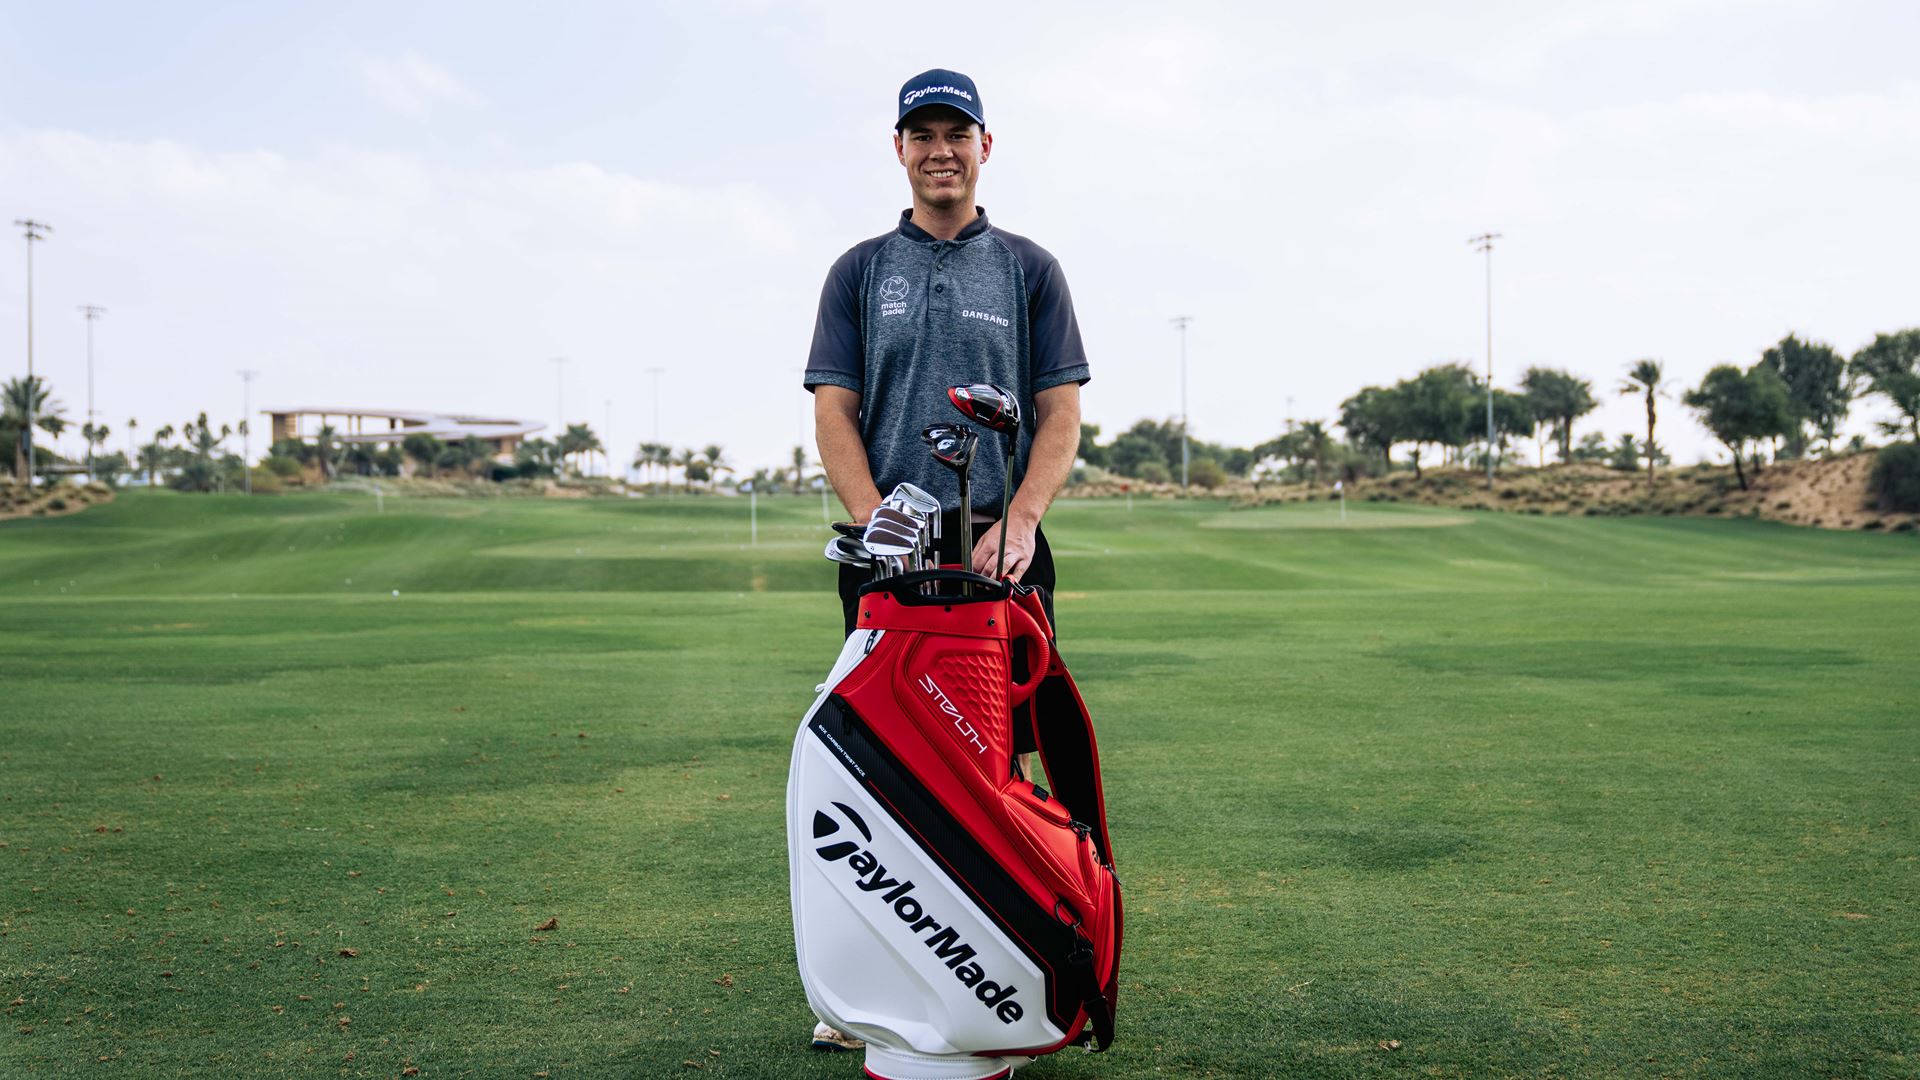 Oliver Hundebøll Joins Team TaylorMade; Choosing To Play a Full Bag of TaylorMade Equipment and Golf Ball